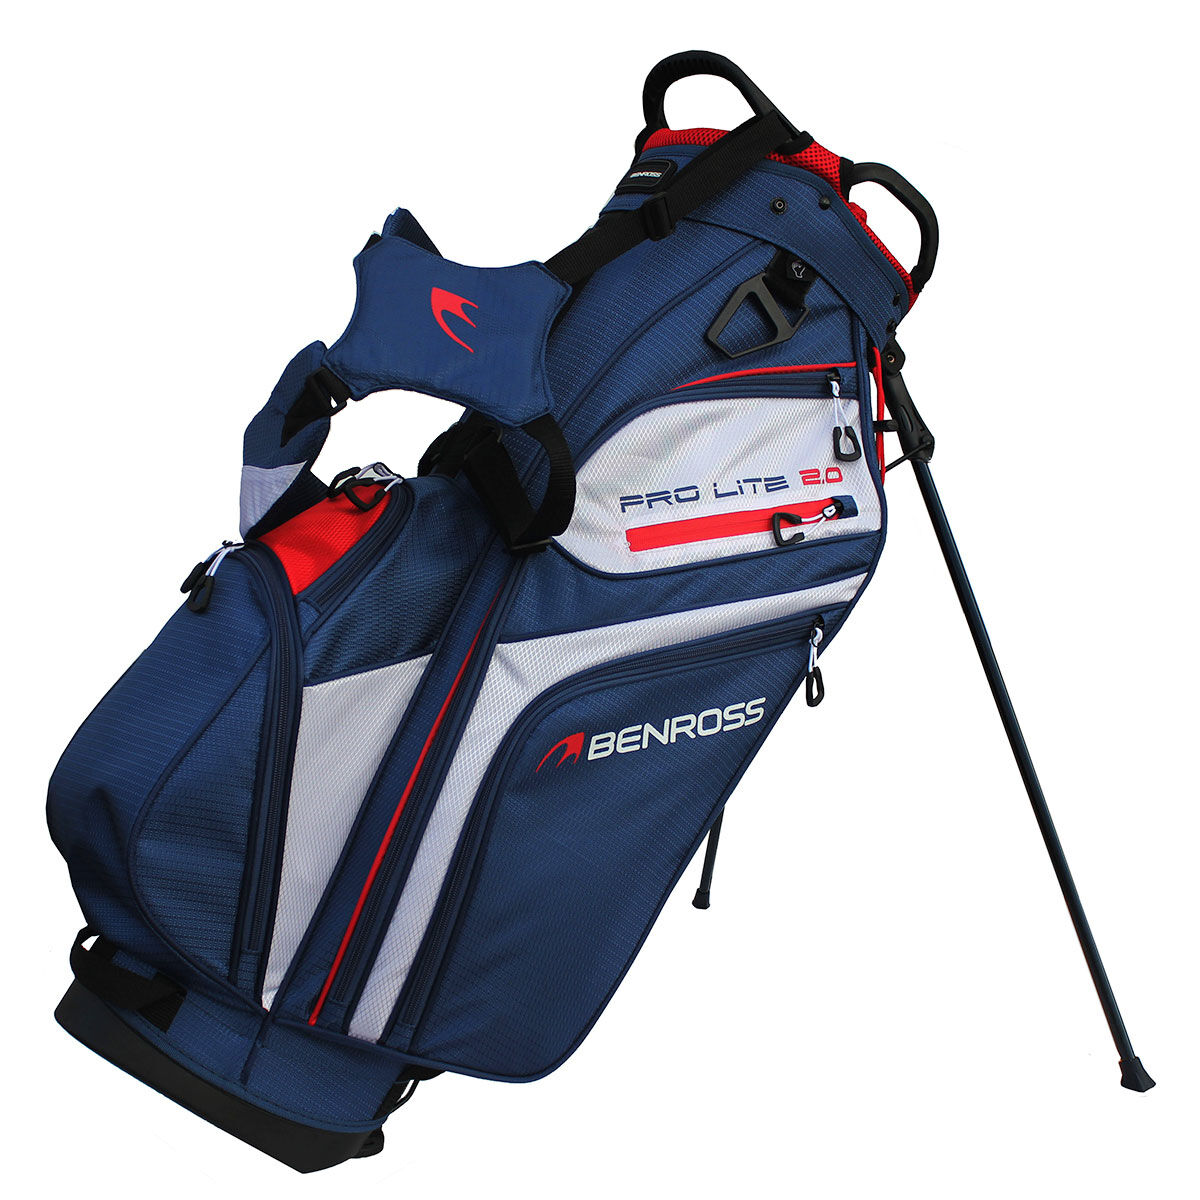 Benross Pro-Lite 2.0 Golf Stand Bag, Navy/white/red, One Size | American Golf - Father's Day Gift von Benross